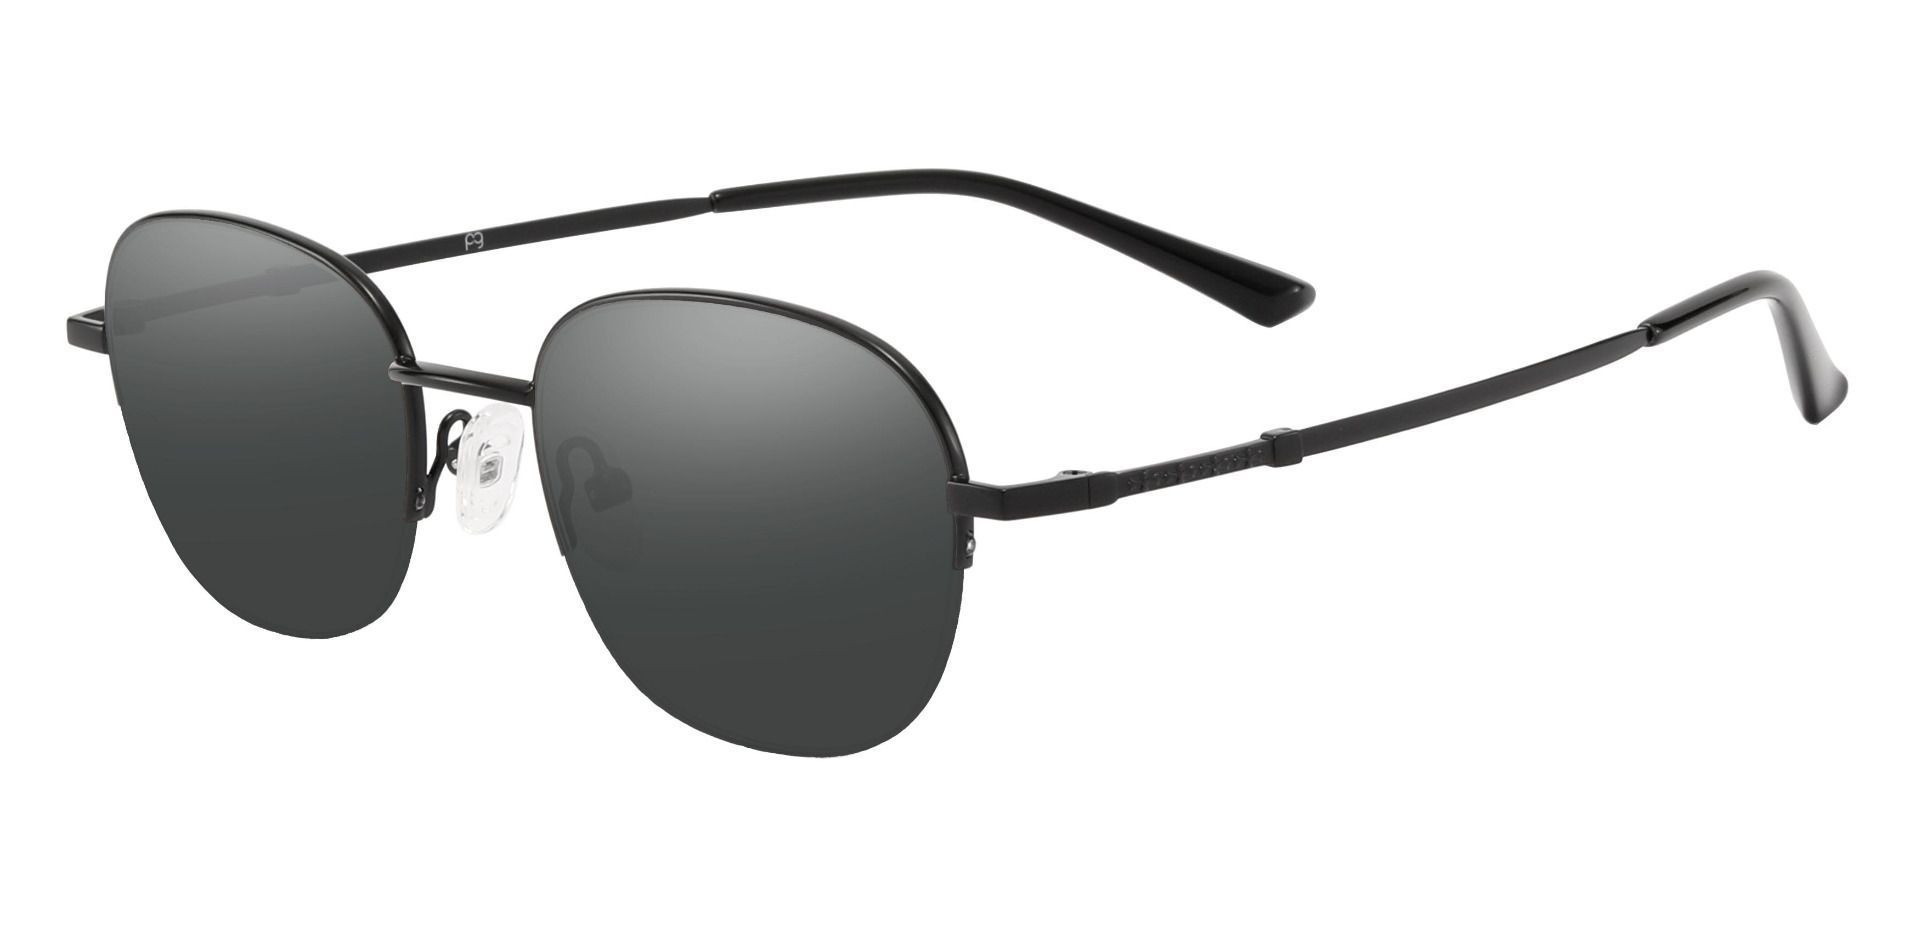 Rochester Oval Lined Bifocal Sunglasses - Black Frame With Gray Lenses